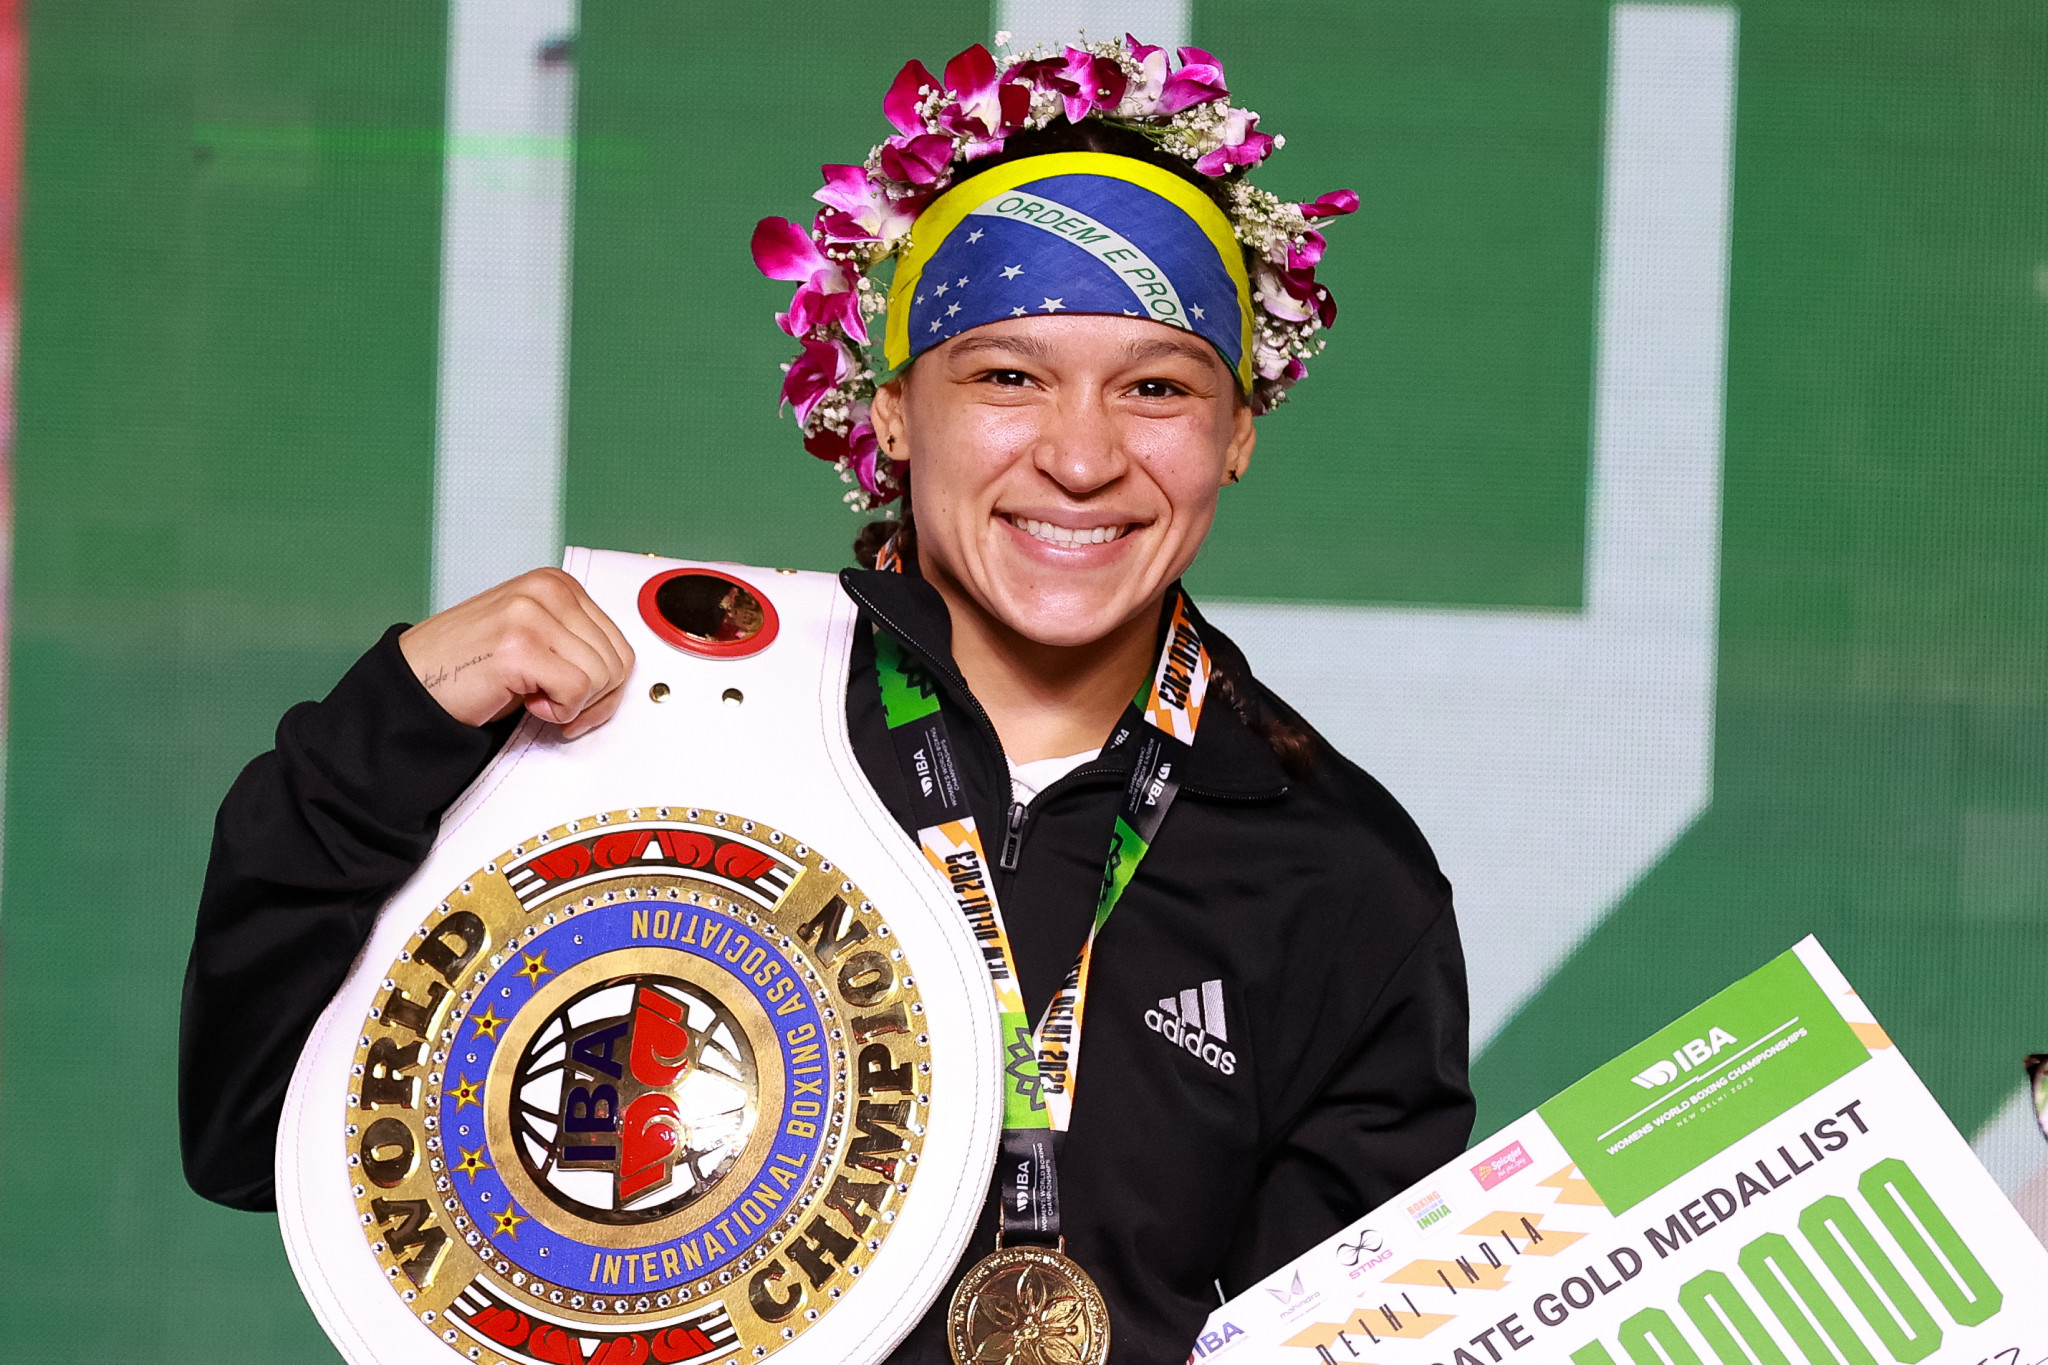 Olympic silver medallist Beatriz Ferreira outclassed Colombia's Angie Paola Valdés as she won the lightweight title by unanimous decision ©IBA